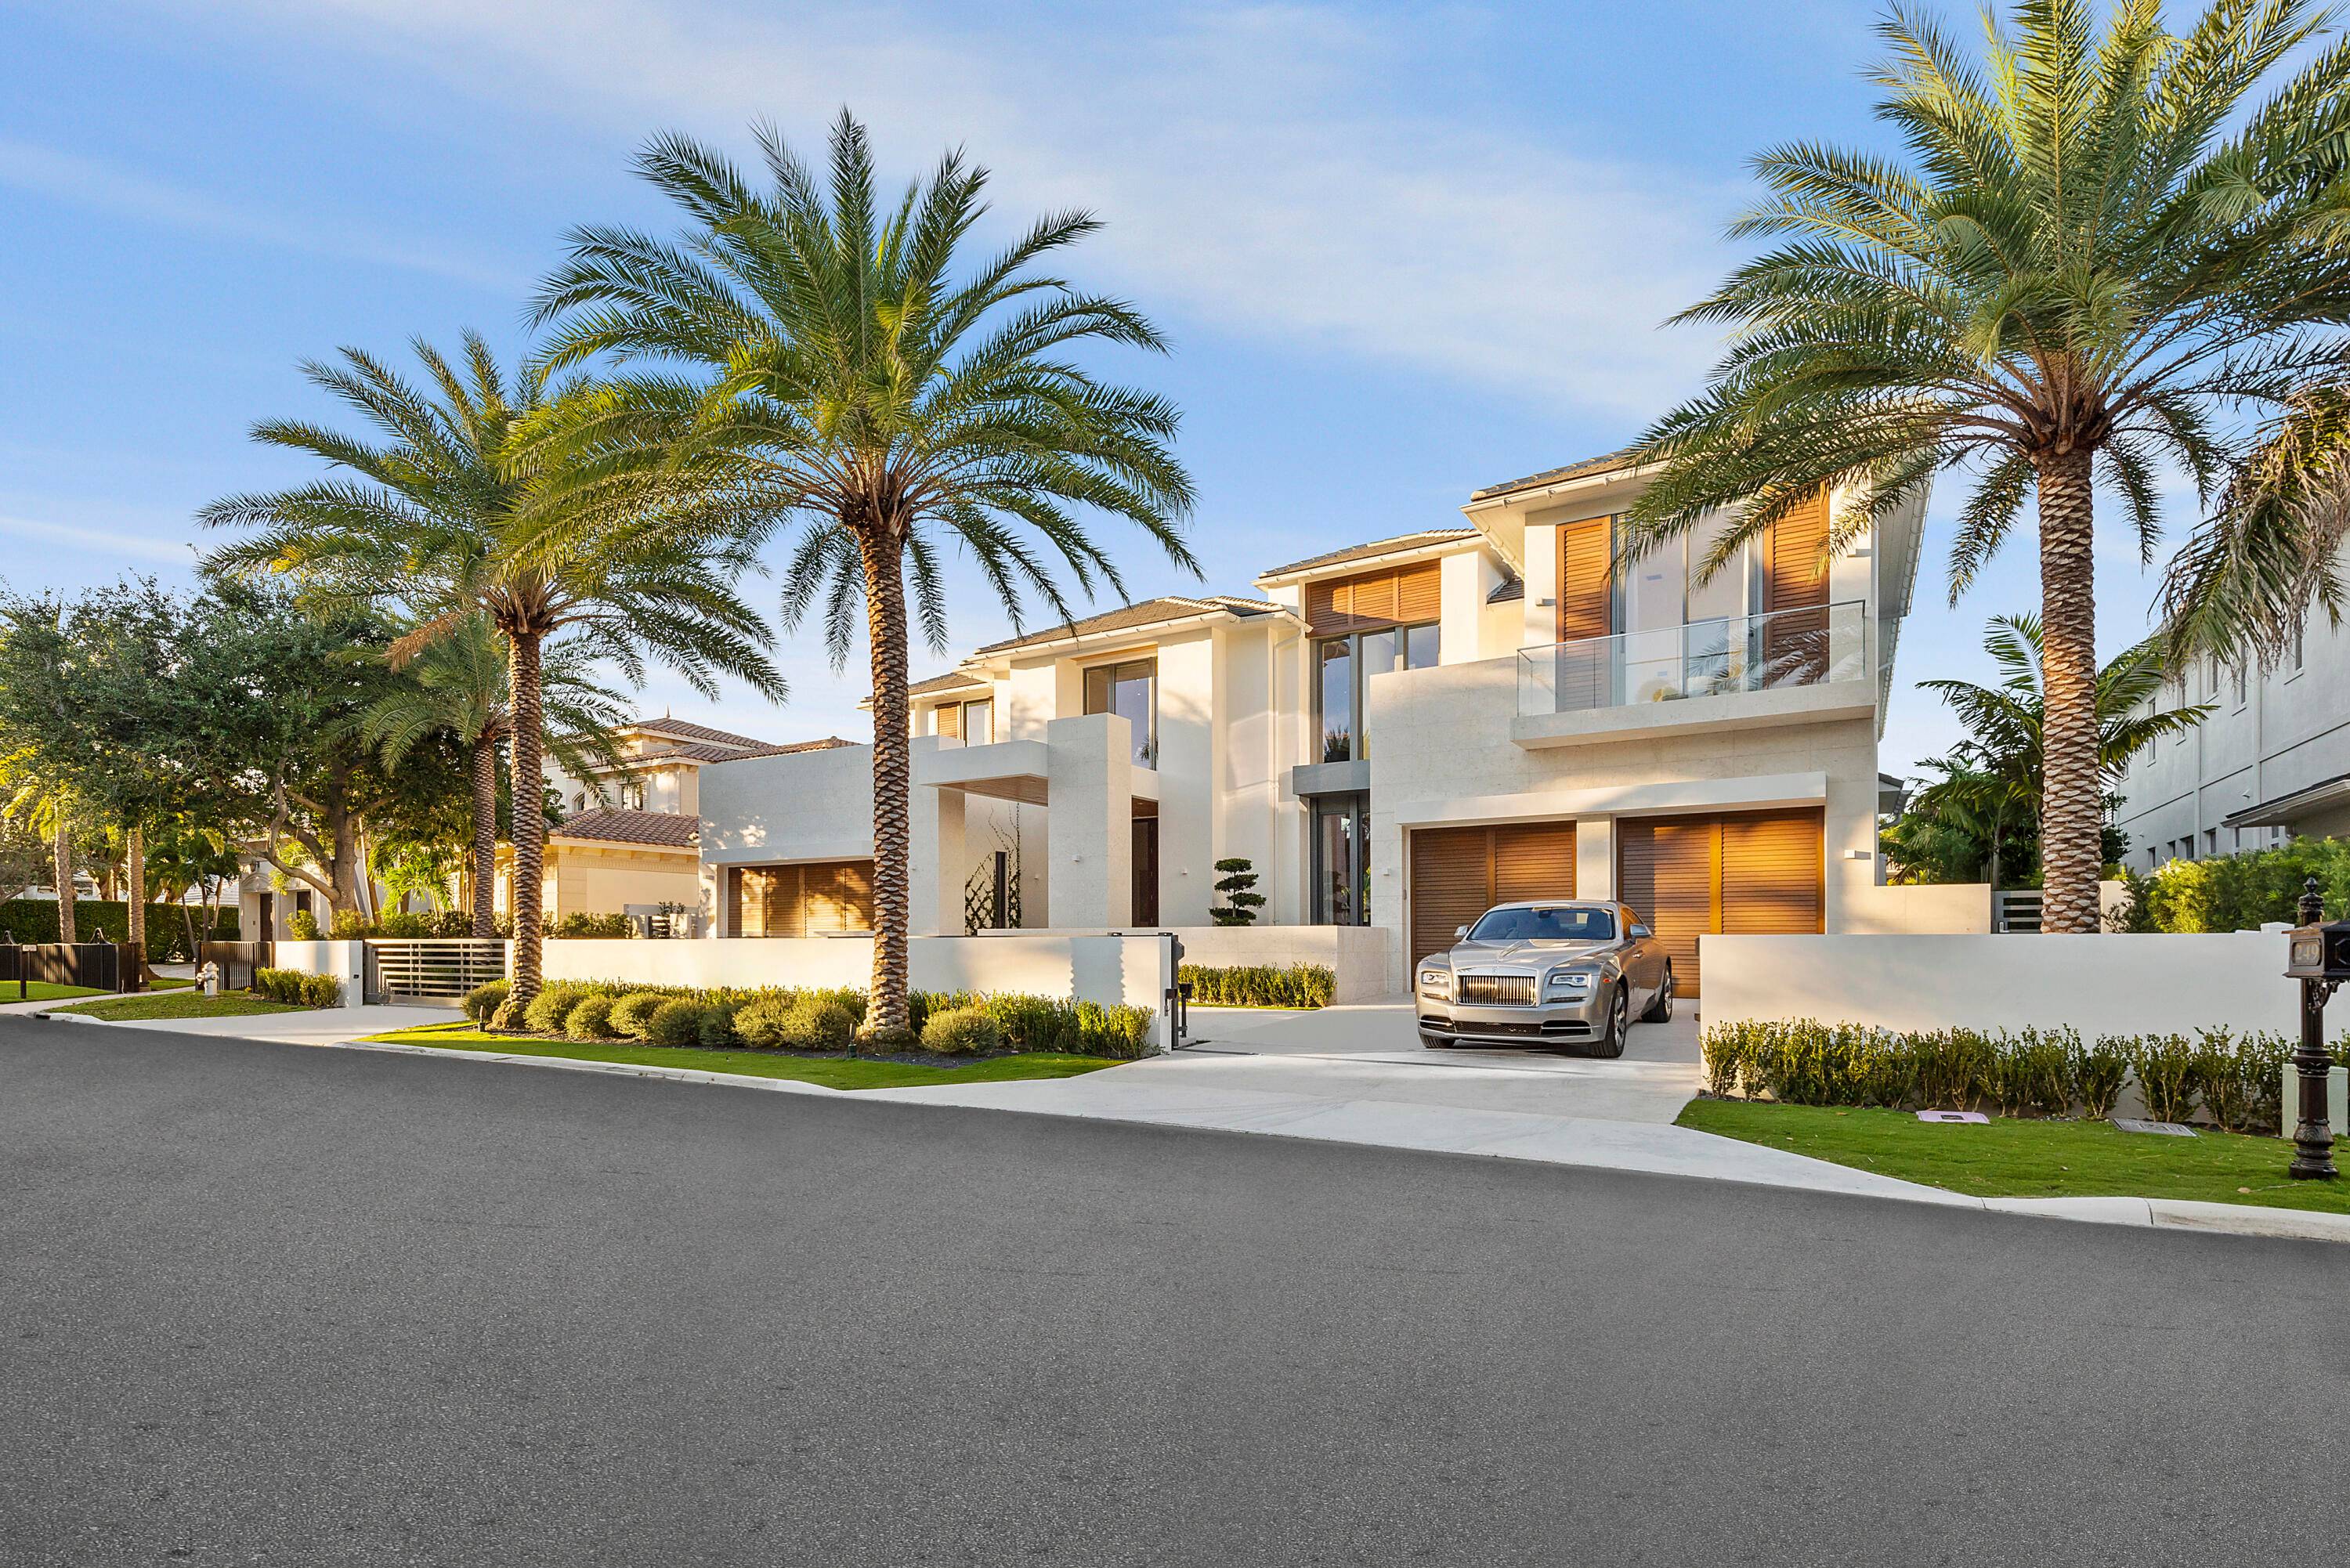 Transcend the expected at Villa Bianca, a contemporary jewel nestled in Boca Raton's prestigious Royal Palm Yacht Country Club.